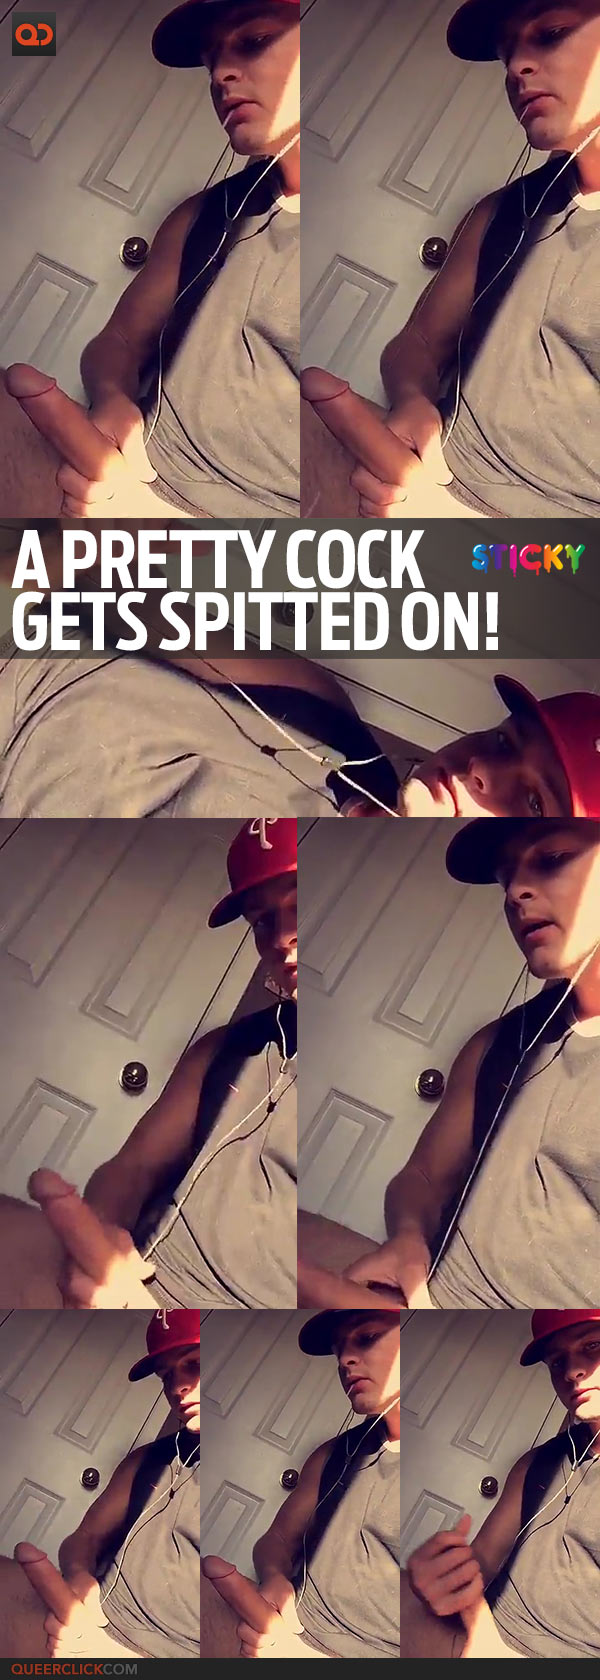 A Pretty Cock Gets Spitted On!